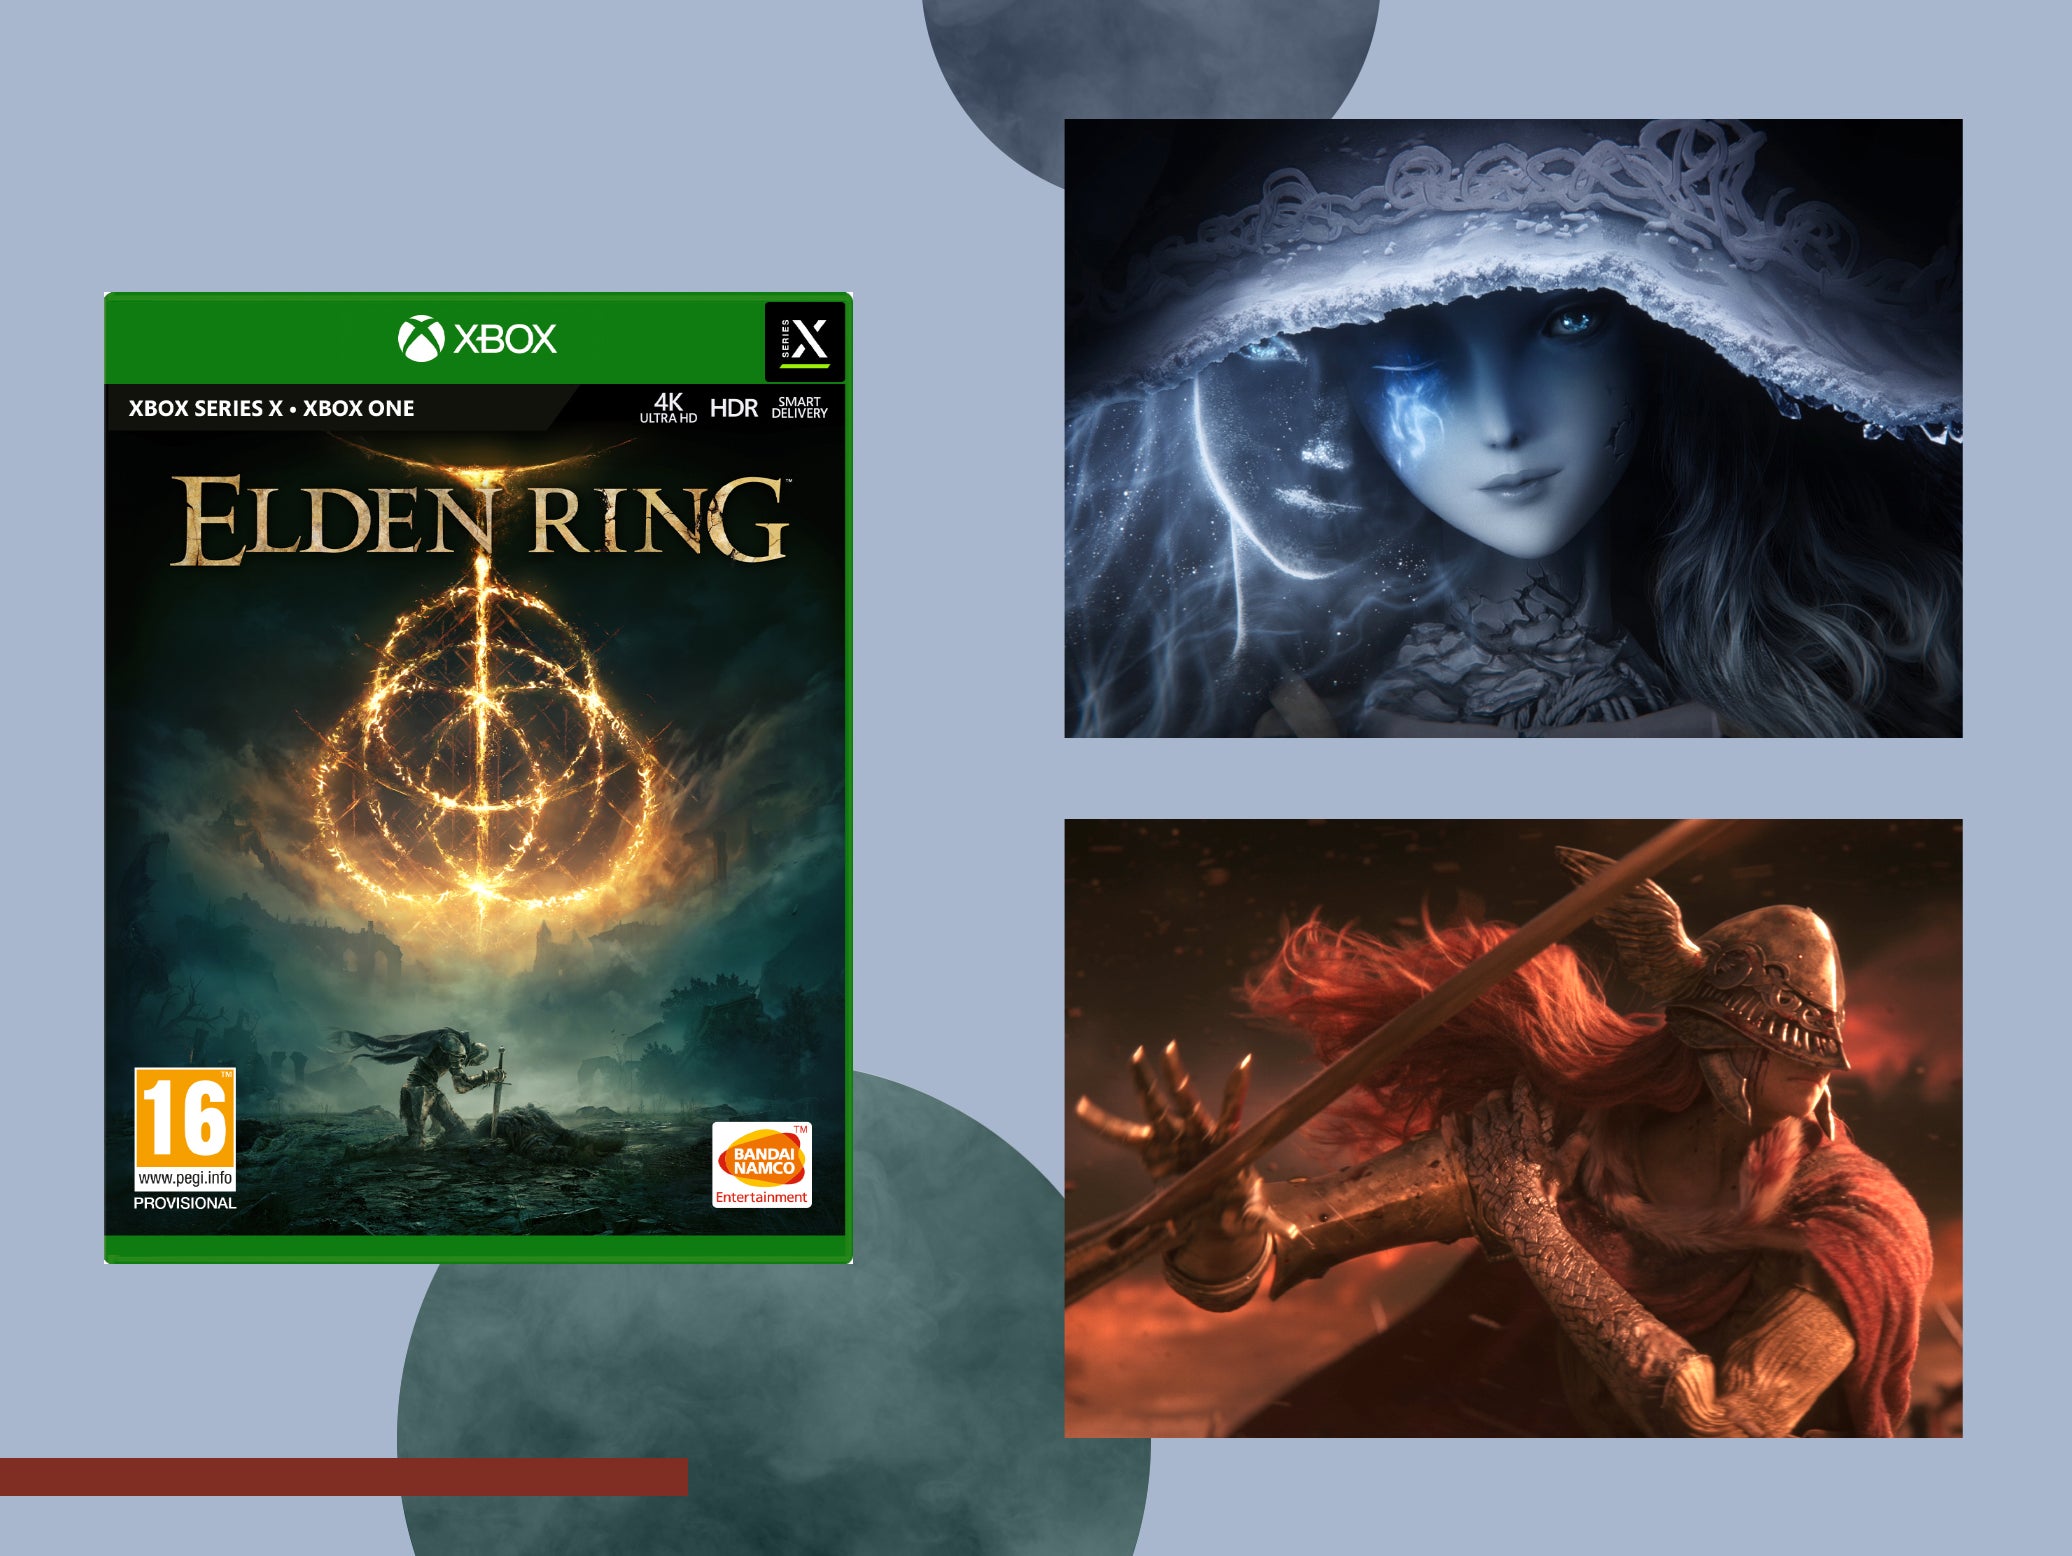 Elden Ring system requirements revealed — and they're pretty